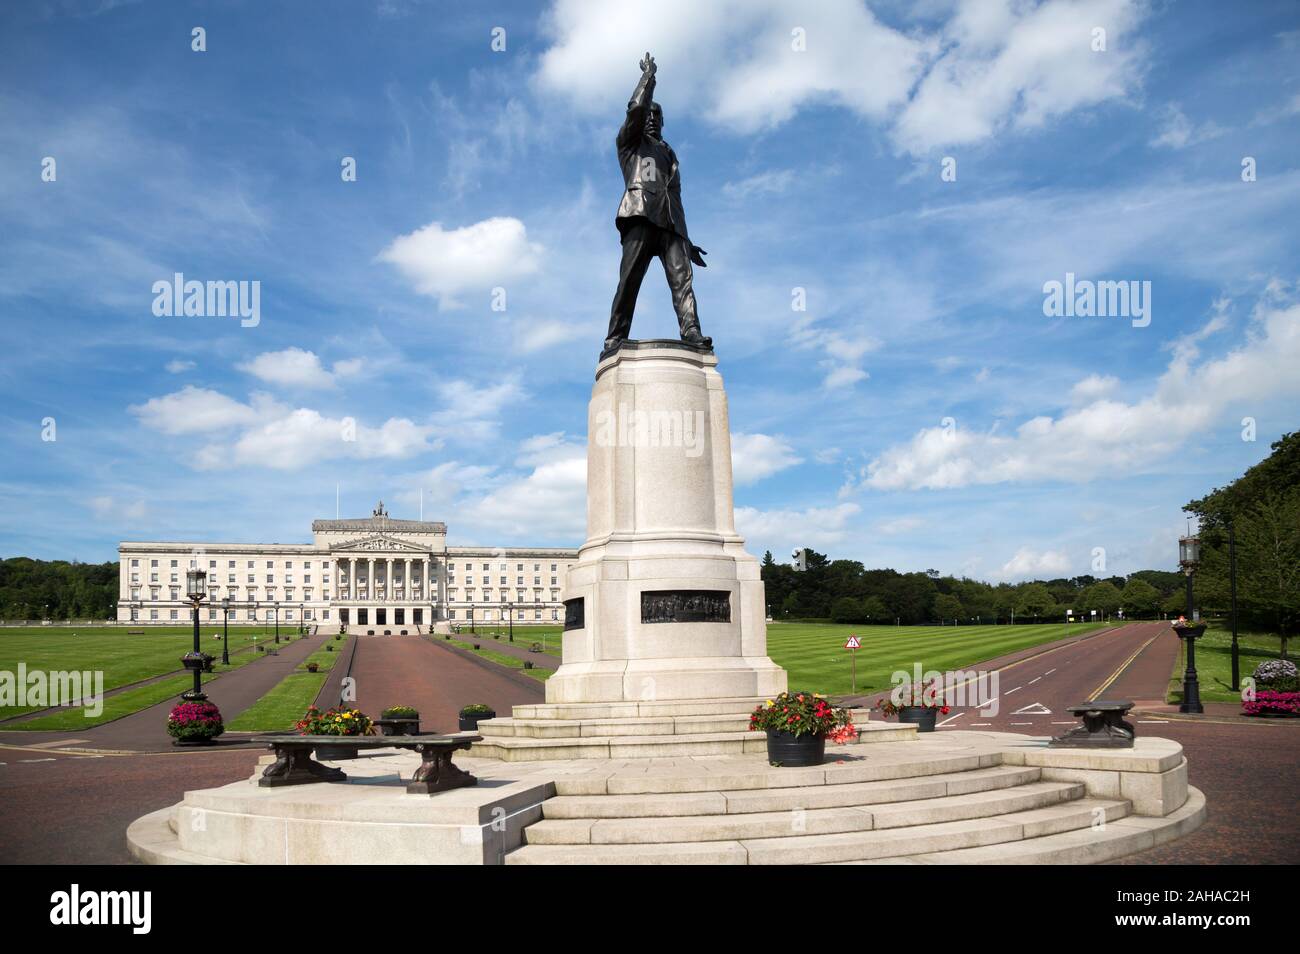 15.07.2019, Belfast, Northern Ireland, Great Britain - Stormont Castle, seat of the Northern Ireland Assembly and government of Northern Ireland - sus Stock Photo